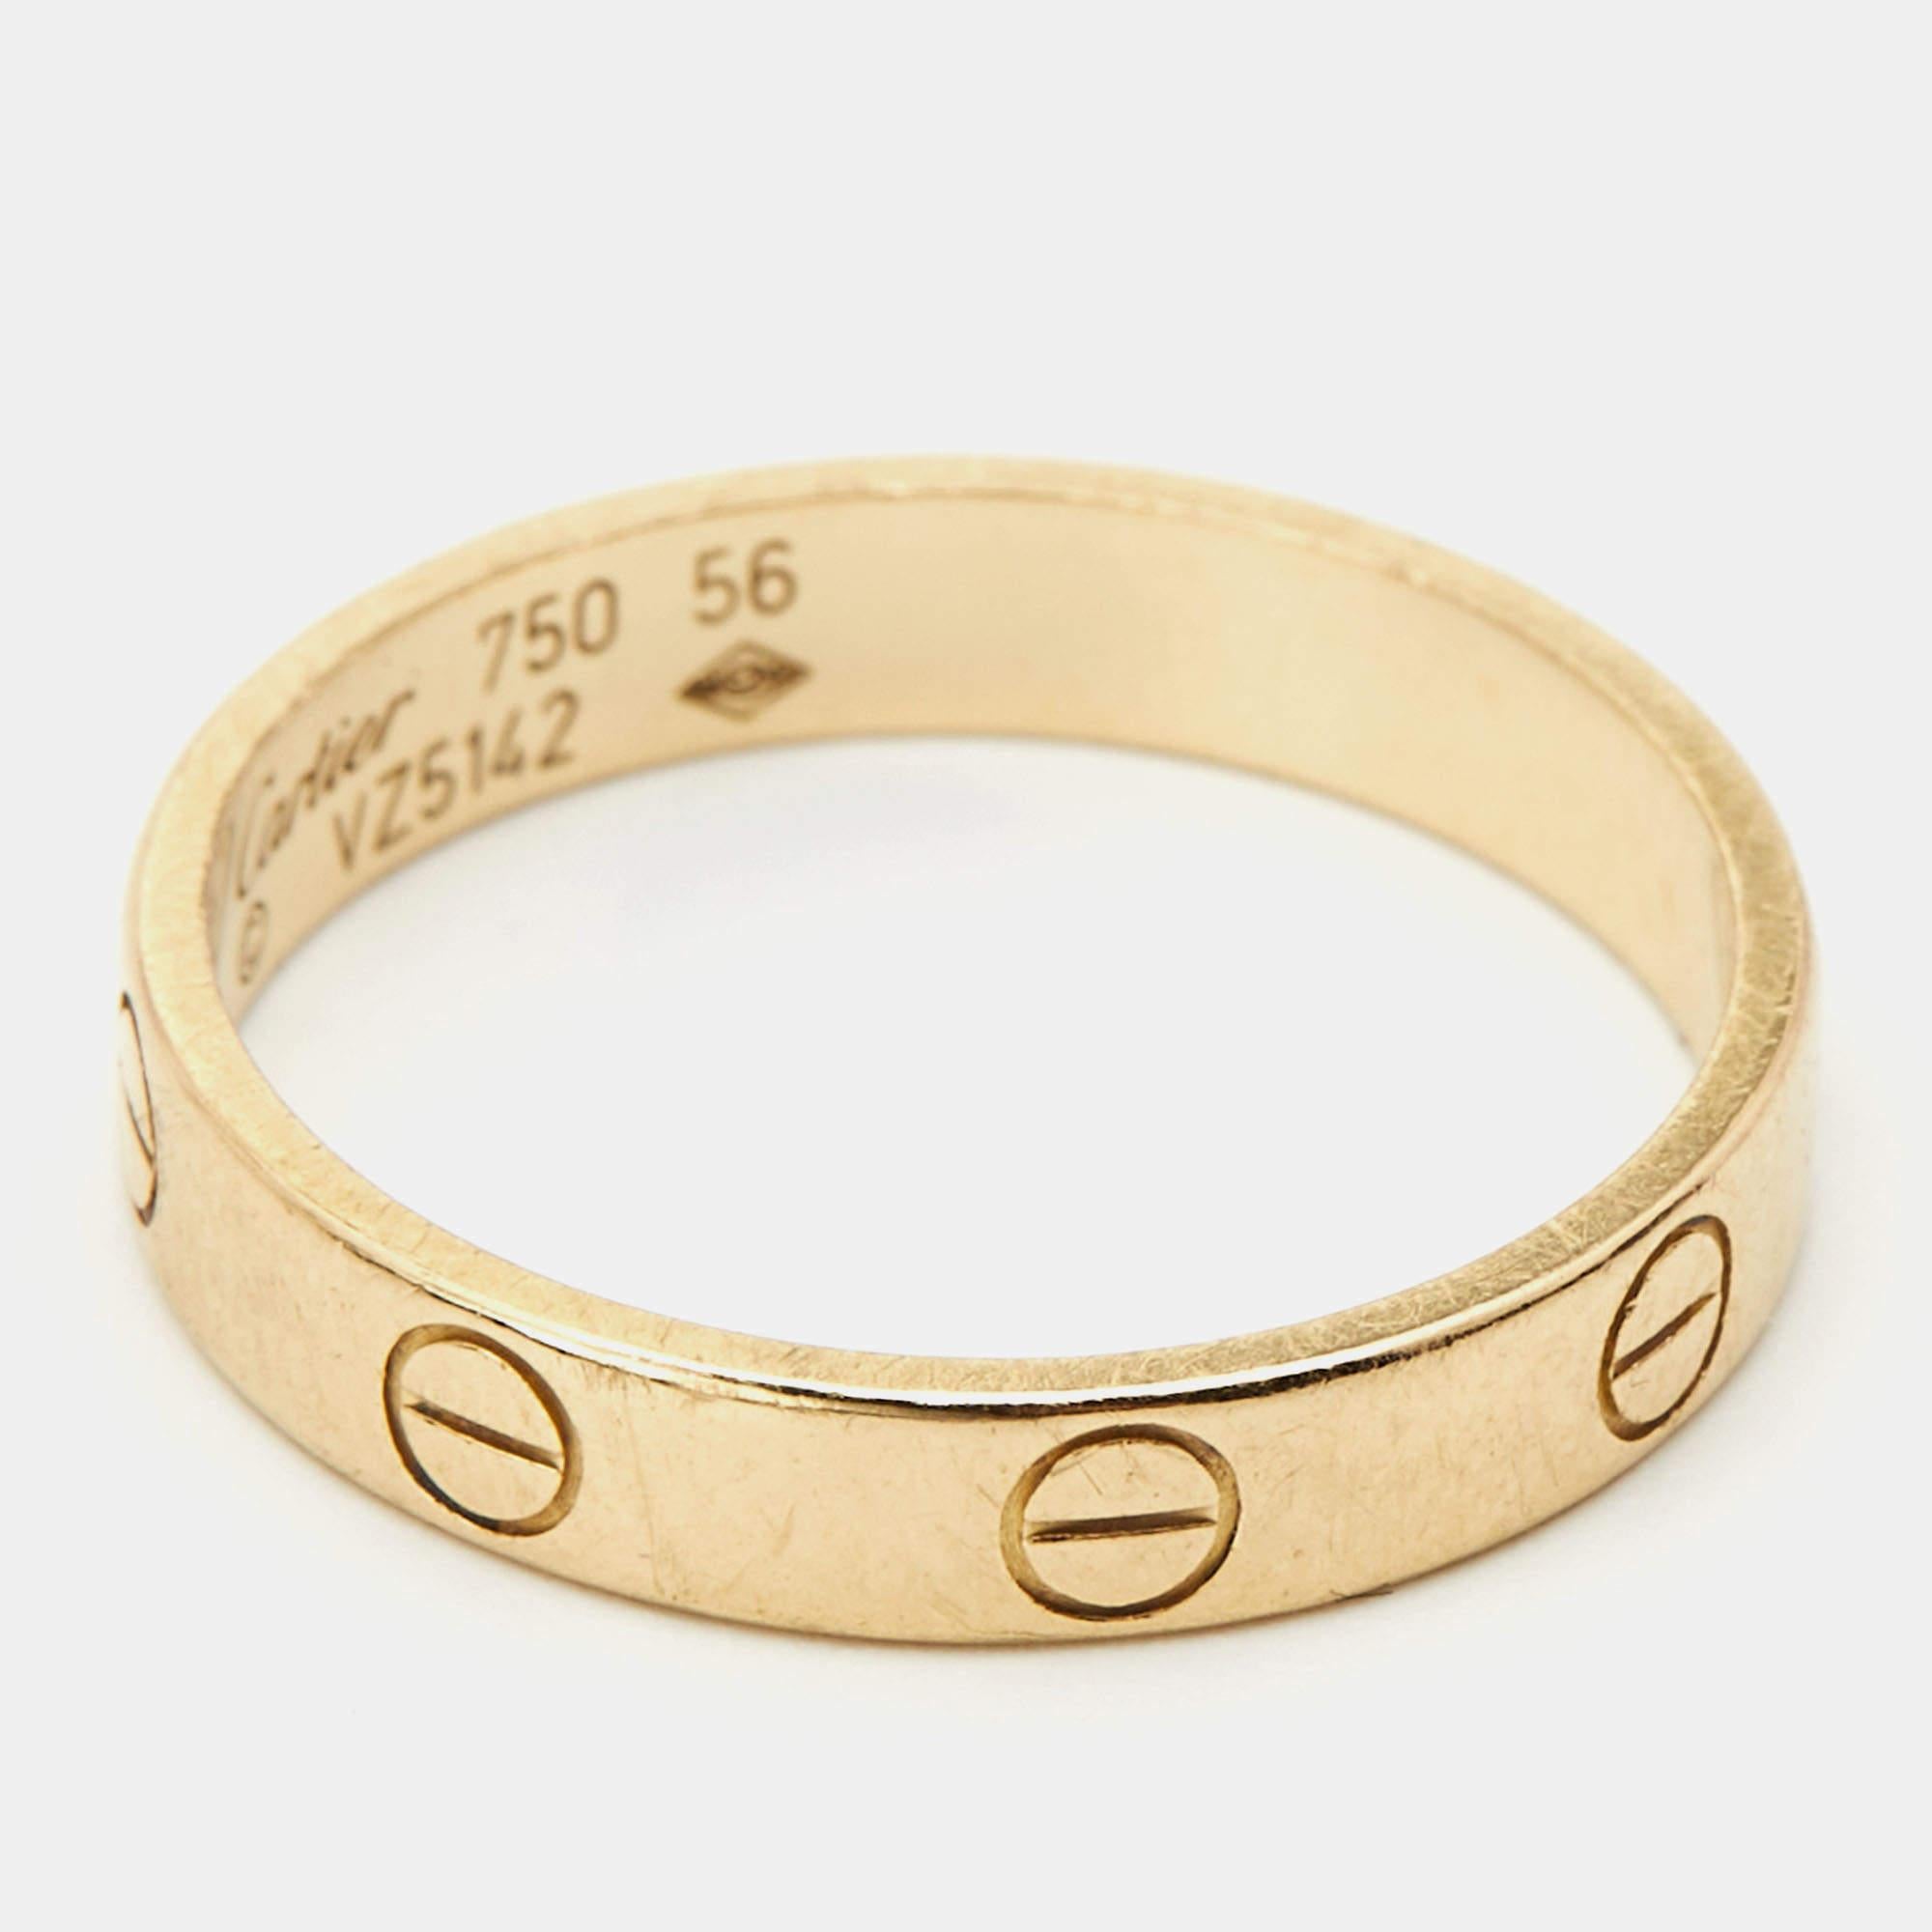 One of the most iconic and loved designs from the house of Cartier, this stunning Band ring is an icon of style and luxury. Constructed in 18K yellow gold, this ring features screw details all around the surface as symbols of a sealed and secured